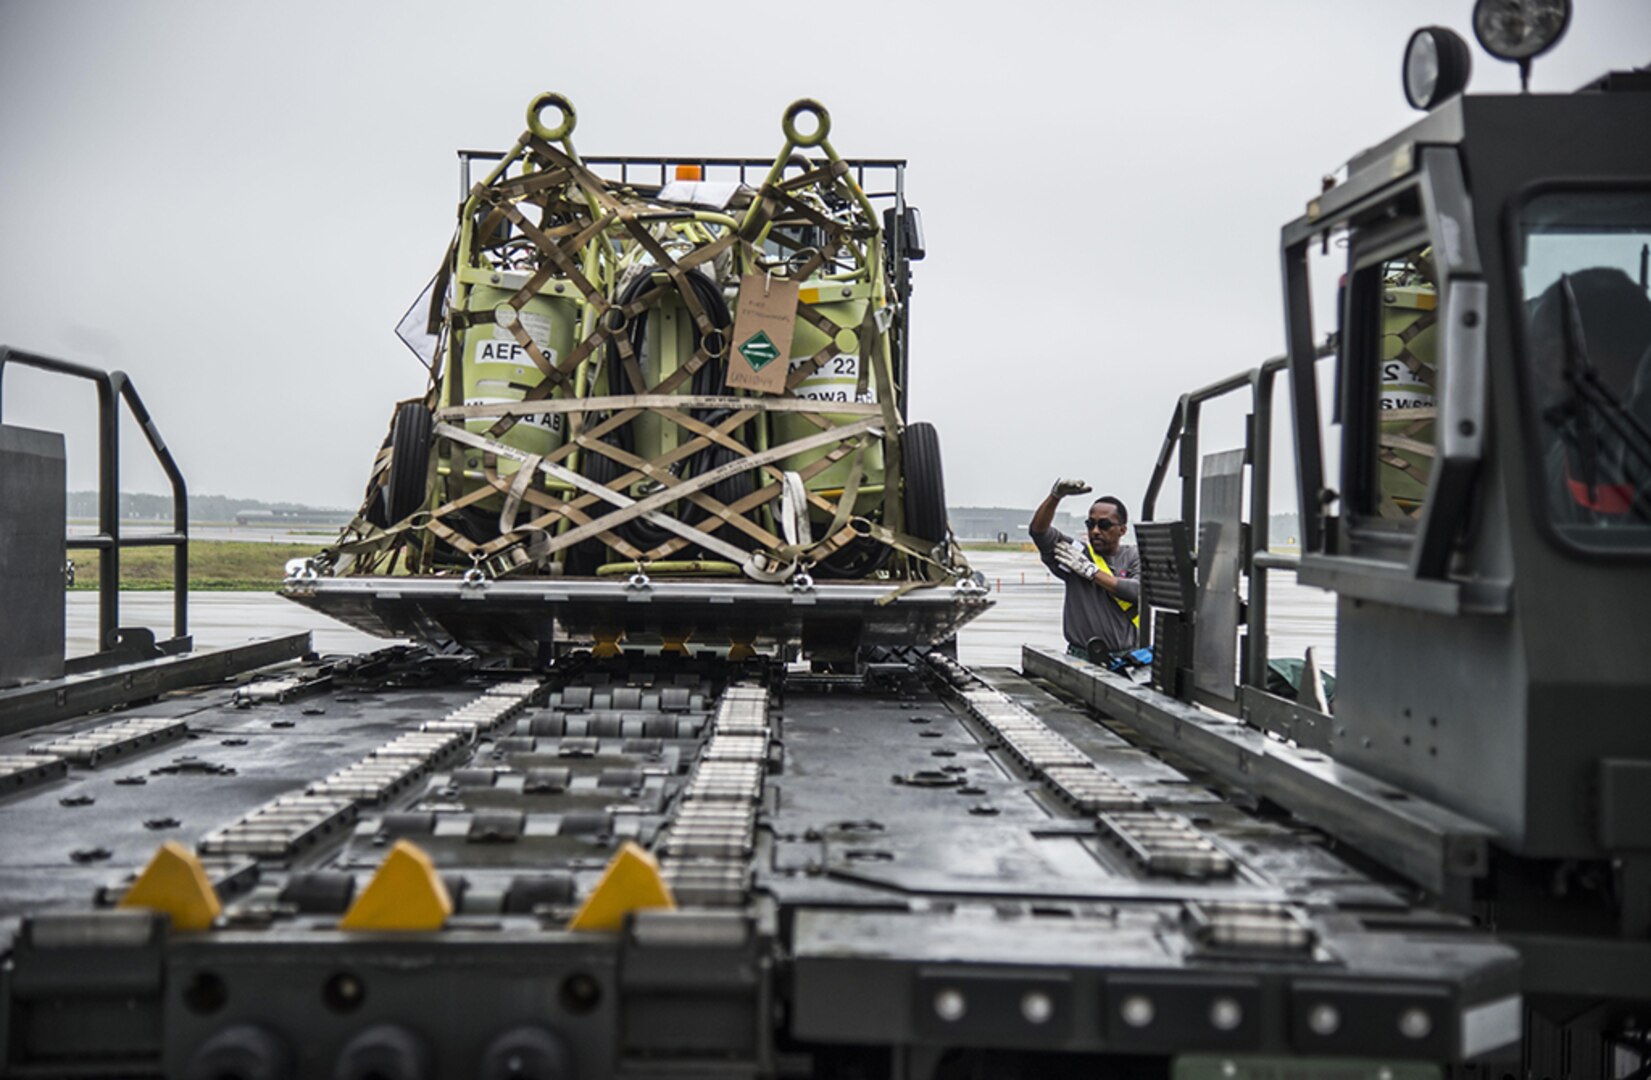 (July 17, 2016) - A loadcrew member directs an Airman operating a k-loader at Misawa Air Base.  Airmen from the 35th Logistics Readiness Squadron loaded more than BLANK lbs of cargo for Exercise Pitch Black. Exercise Pitch Black enhances the partnerships Australia has with the participing nations, and the high value it places on regional security and fostering closer ties throughout the Asia Pacific region.